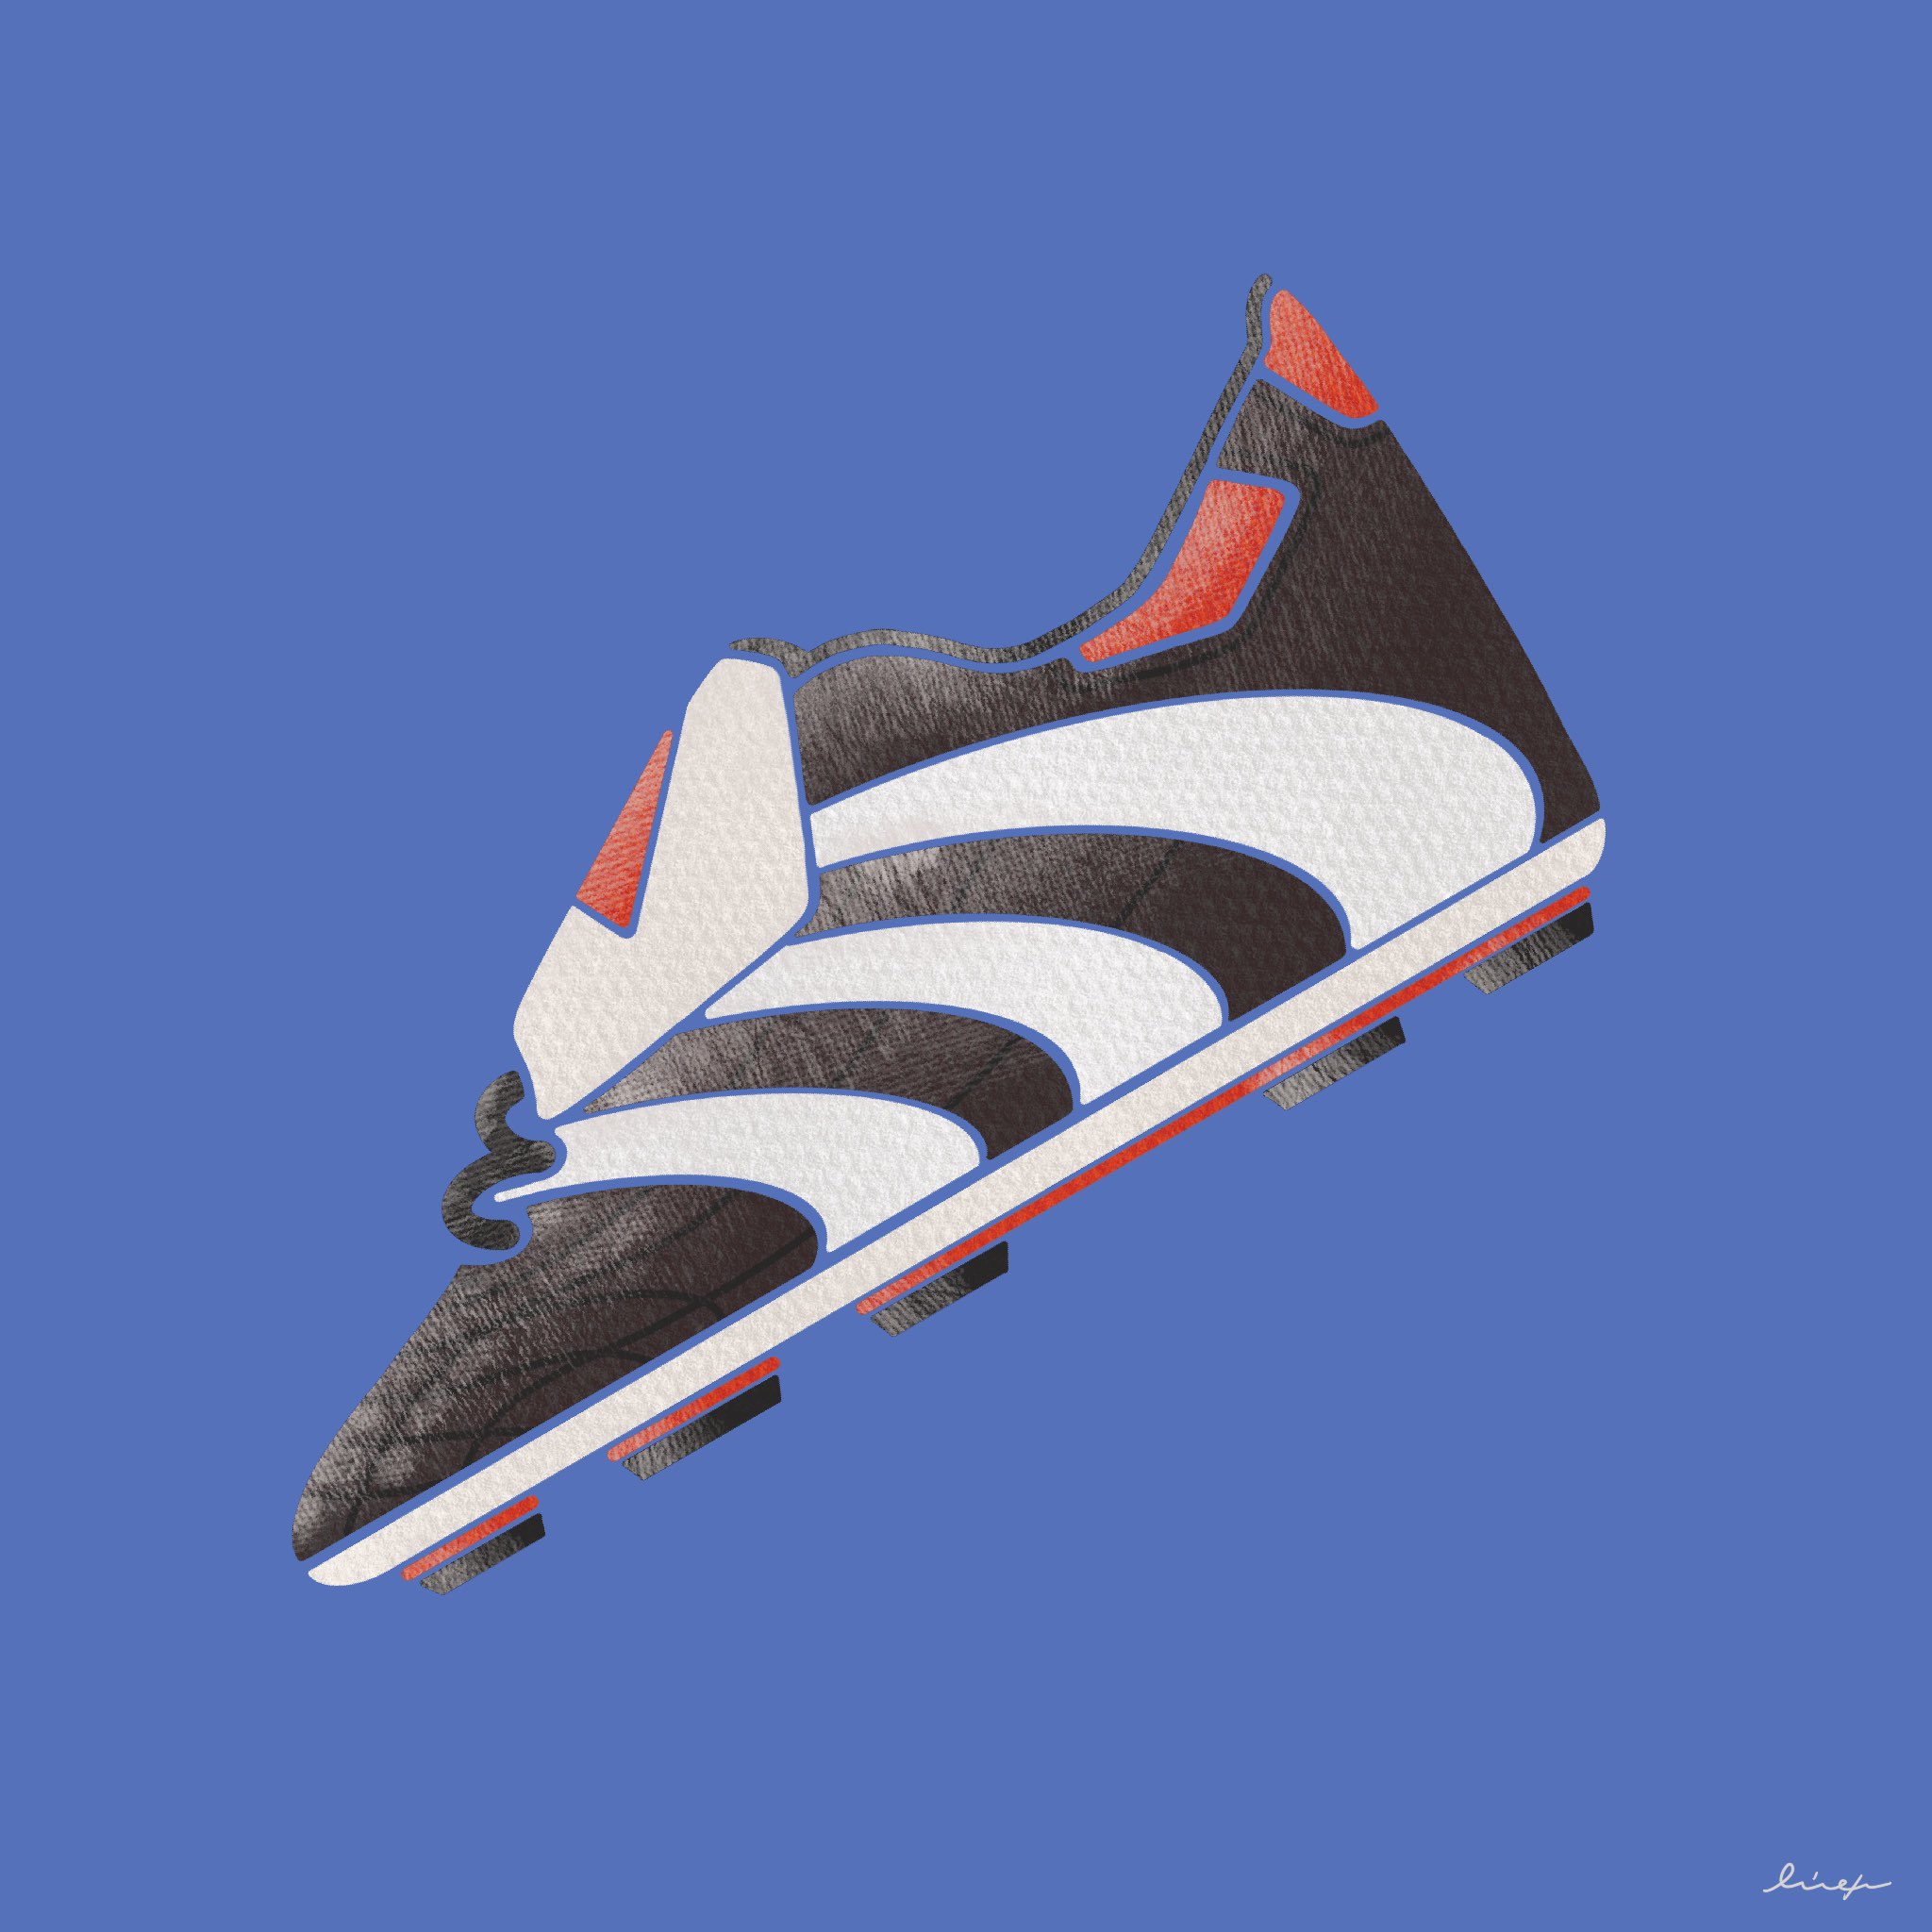 Fcさえき 履いてたスパイクと衝撃を受けたスパイクと1番憧れたスパイク 靴の日 スパイク サッカー イラスト Adidas Nike Fila T Co Qwtf1onc1h Twitter